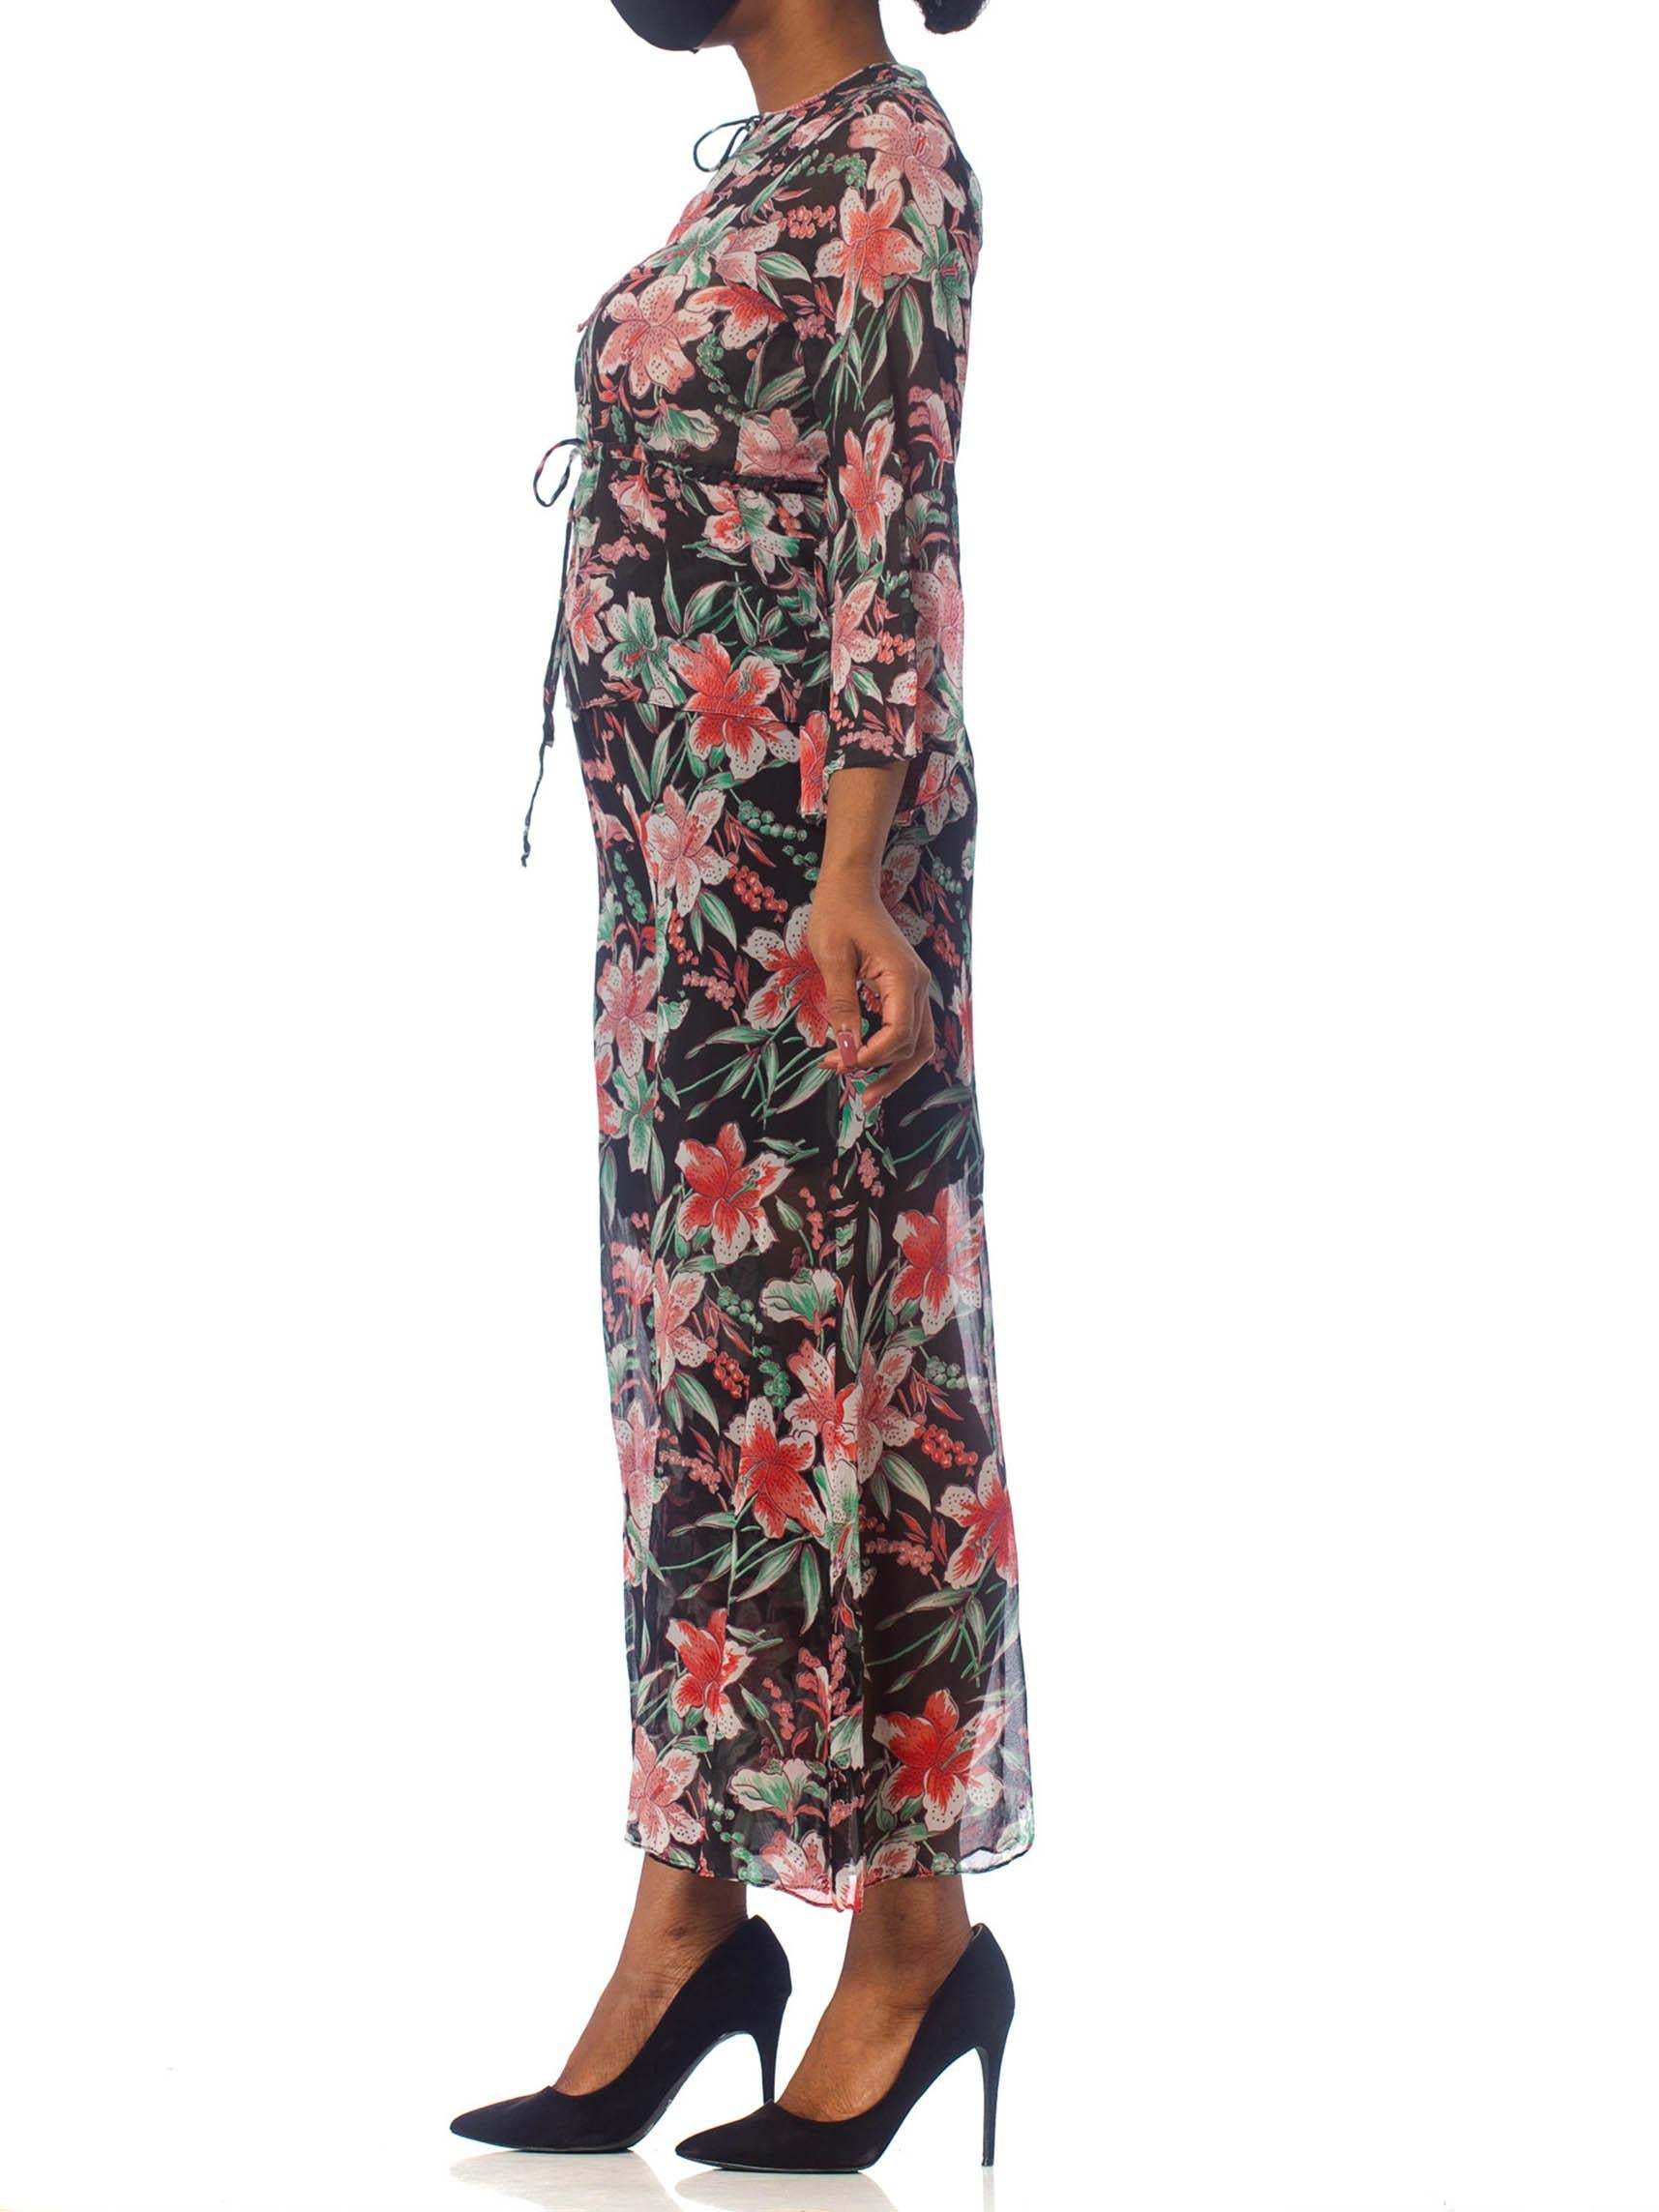 1970S Floral Rayon Chiffon Blouse & Pant Ensemble In Excellent Condition For Sale In New York, NY